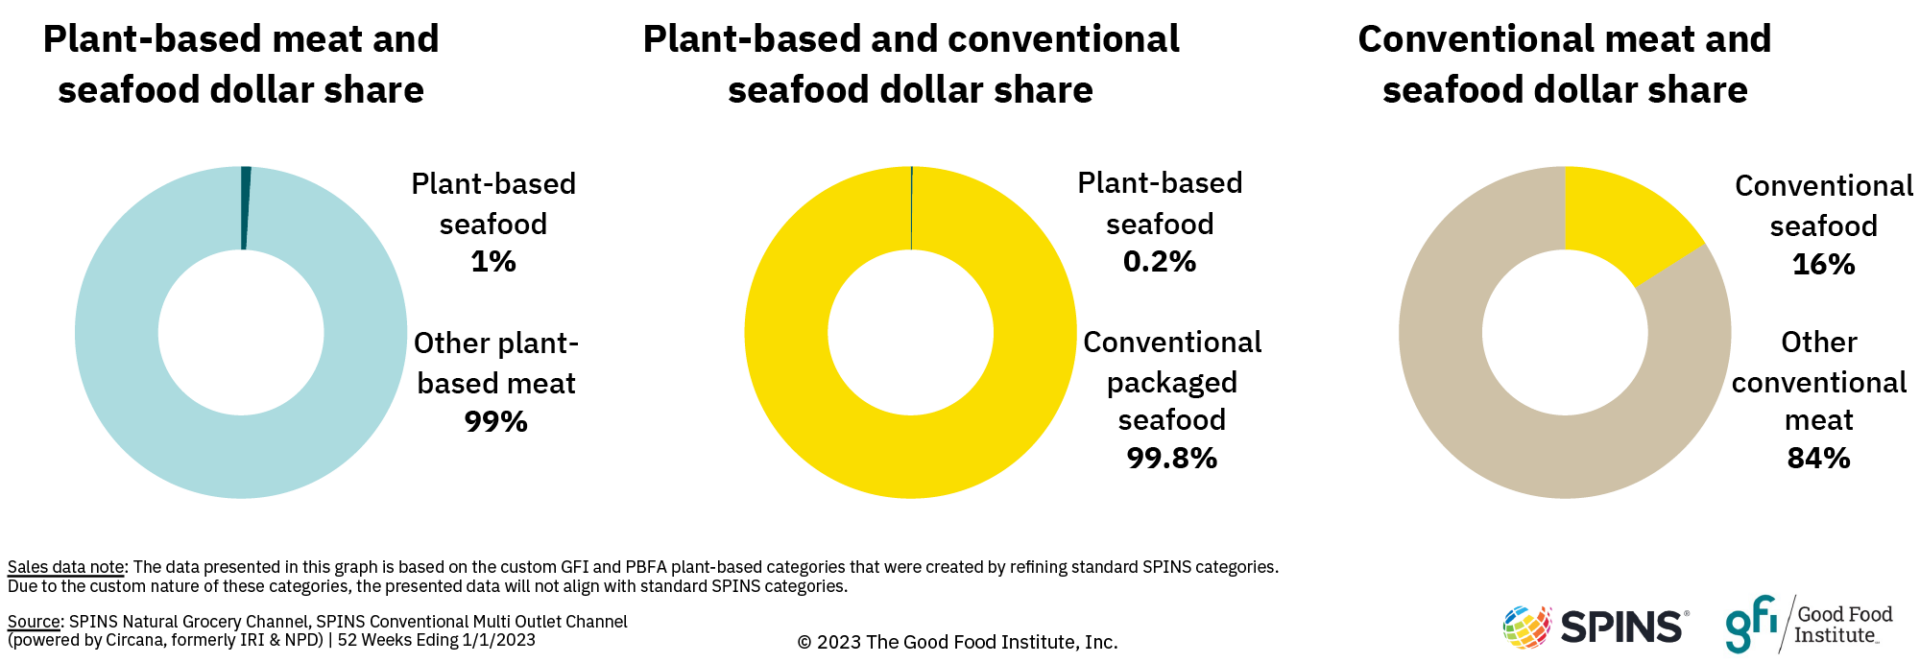 The opportunity for plant-based seafood in the total meat and seafood market